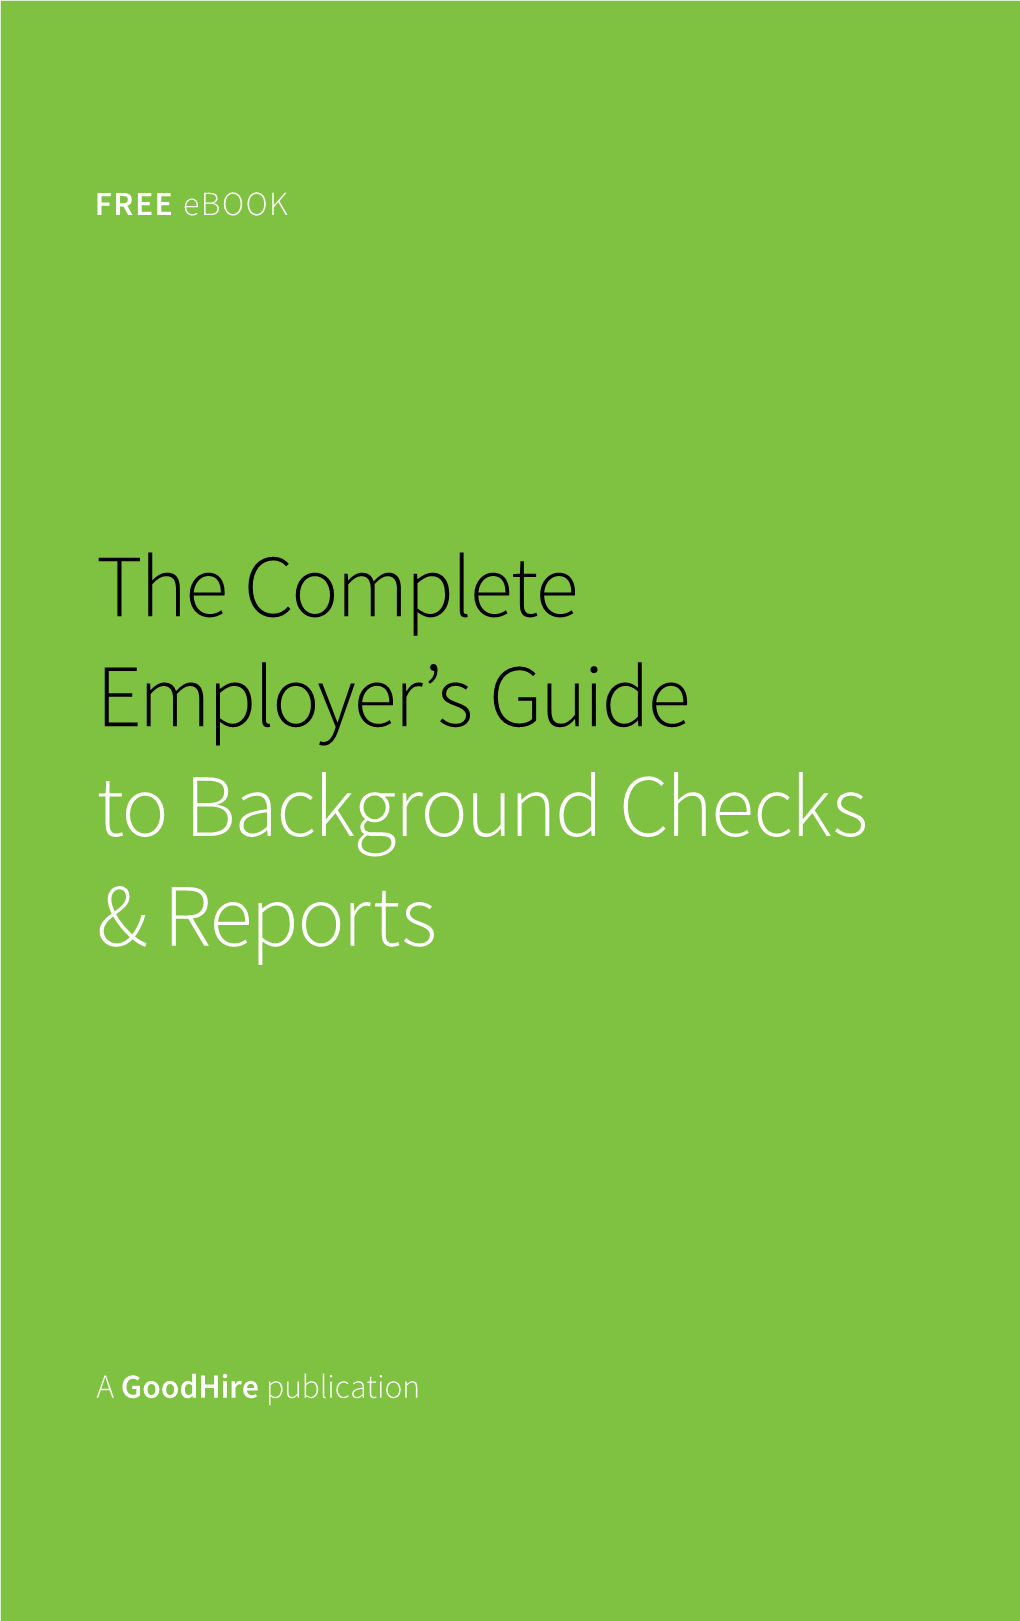 The Complete Employer's Guide to Background Checks & Reports